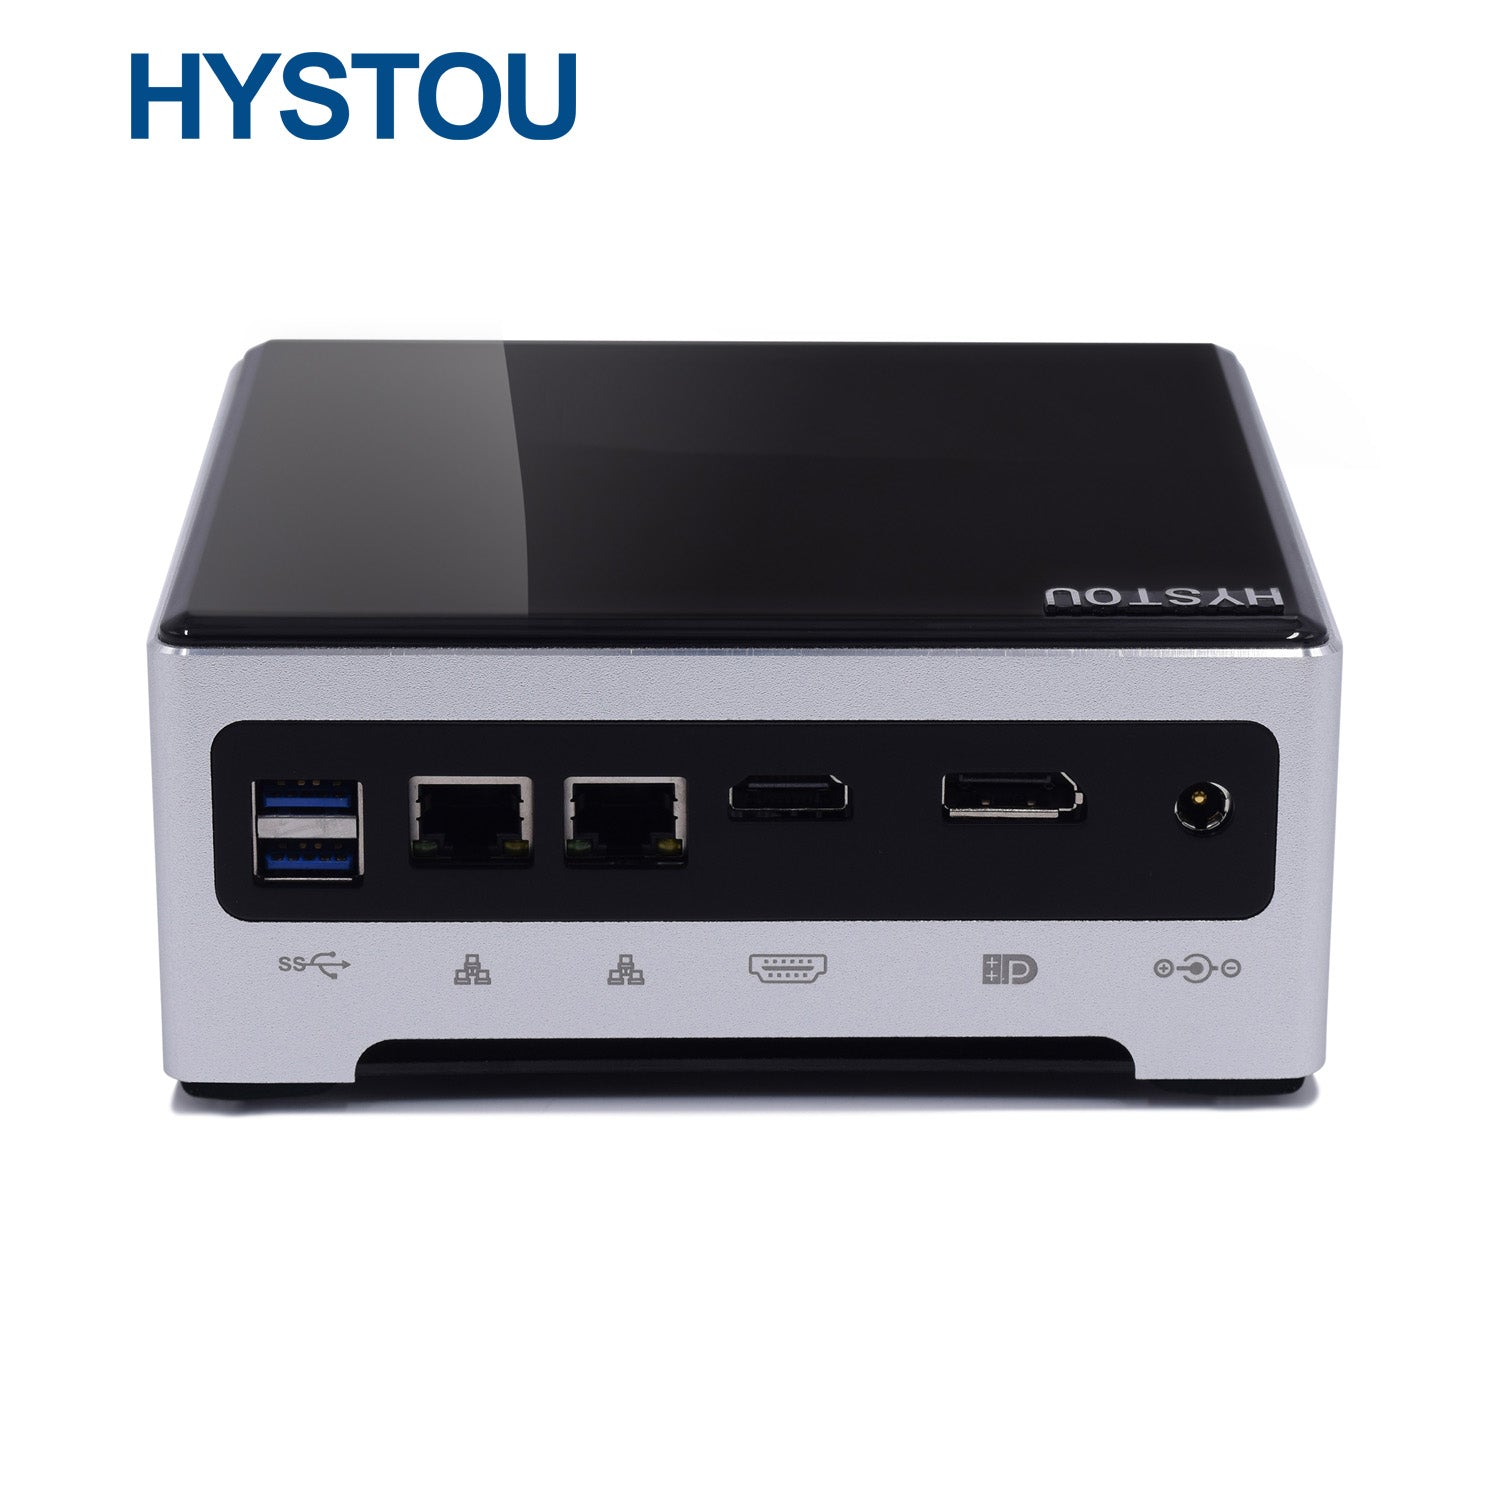 HYSTOU Mini Gaming PC Core i7 7820HK Desktop Game Computer with 3 Years Warranty | Electrr Inc